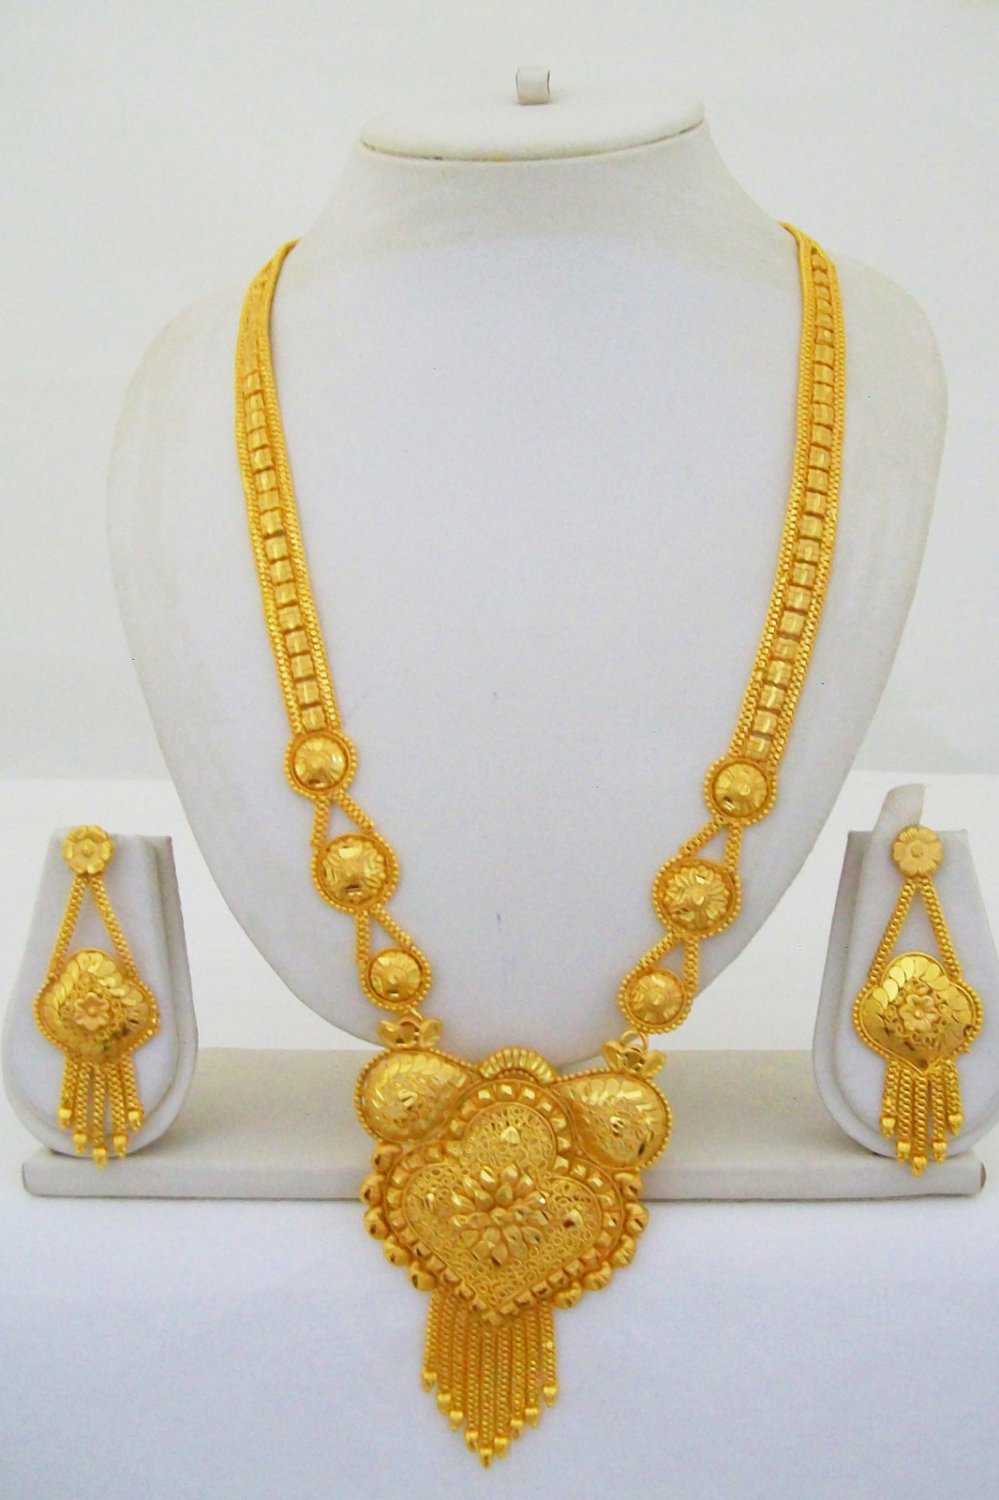 Gold Plated Indian Rani Haar Necklace Earring Bridal Long Filigree 22k ...